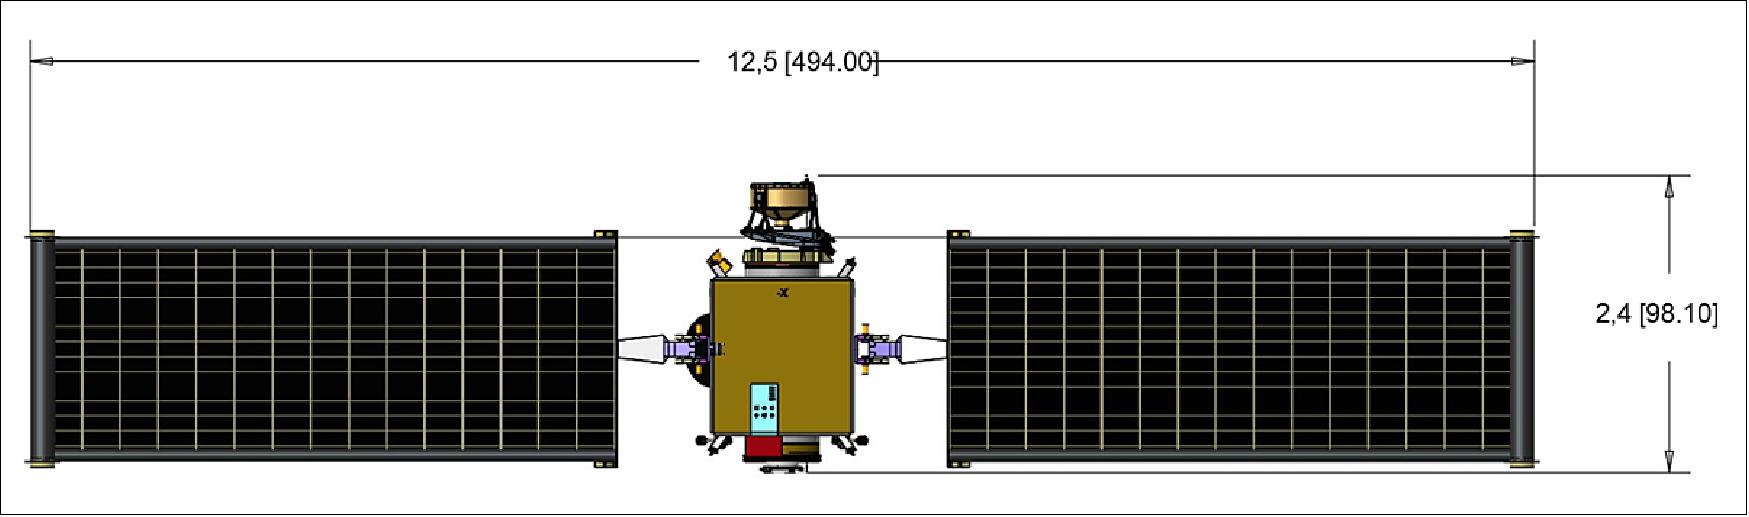 Figure 7: Overview of the DART spacecraft with the Roll Out Solar Arrays (ROSA) extended. With the ROSA arrays fully deployed, DART measures 12.5 meters (494 inches) by 2.4 meters (98.1 inches), image credit: NASA